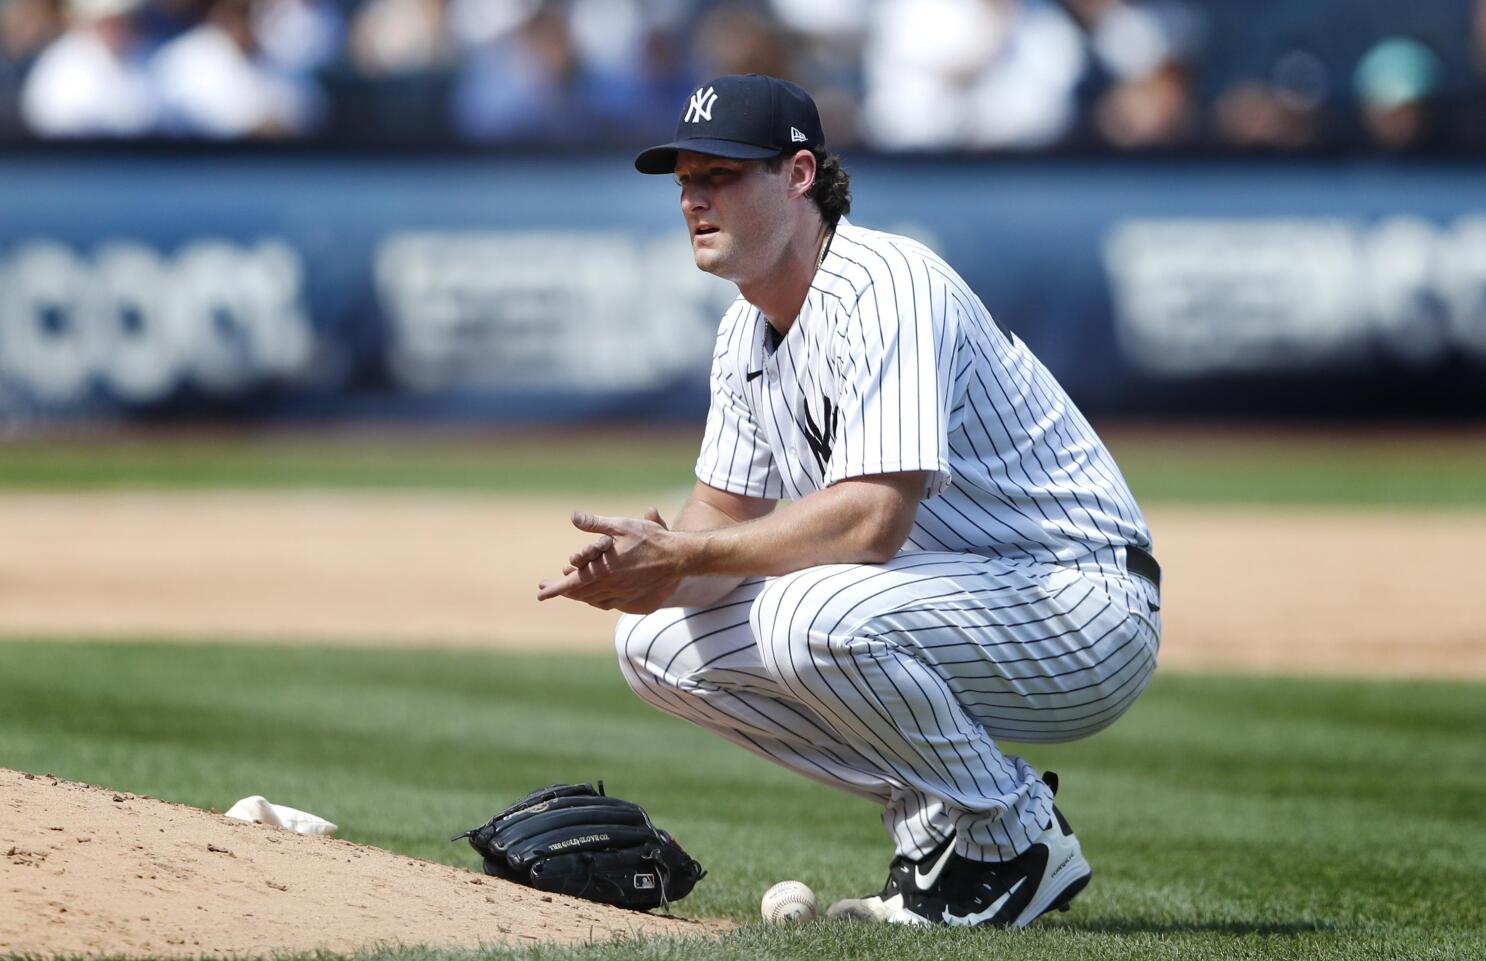 As Struggles Persist, The Yankees Lose Games Gerrit Cole Pitches.